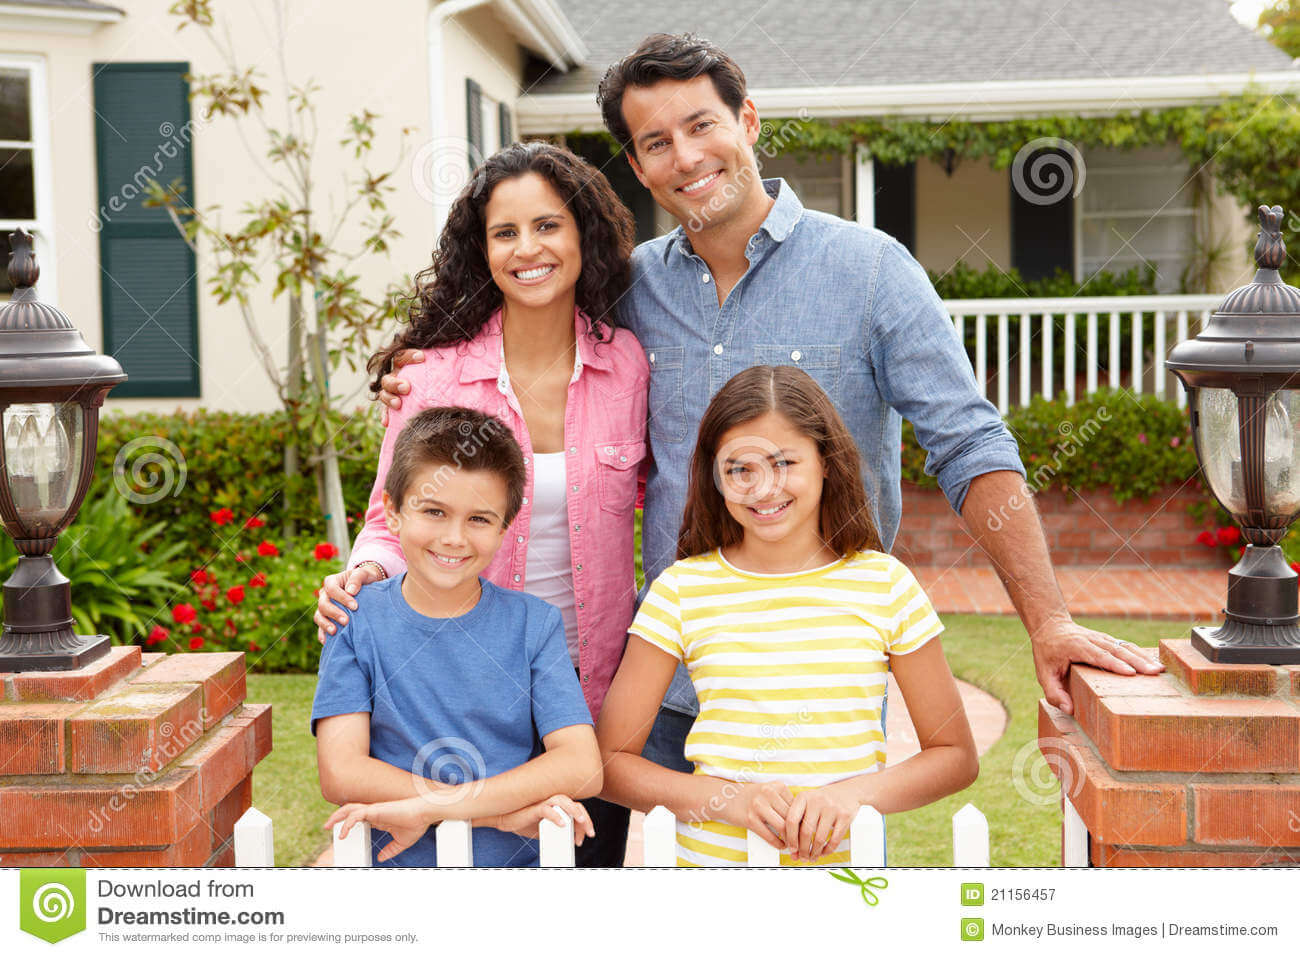 http://www.dreamstime.com/royalty-free-stock-photography-hispanic-family-standing-outside-home-image21156457